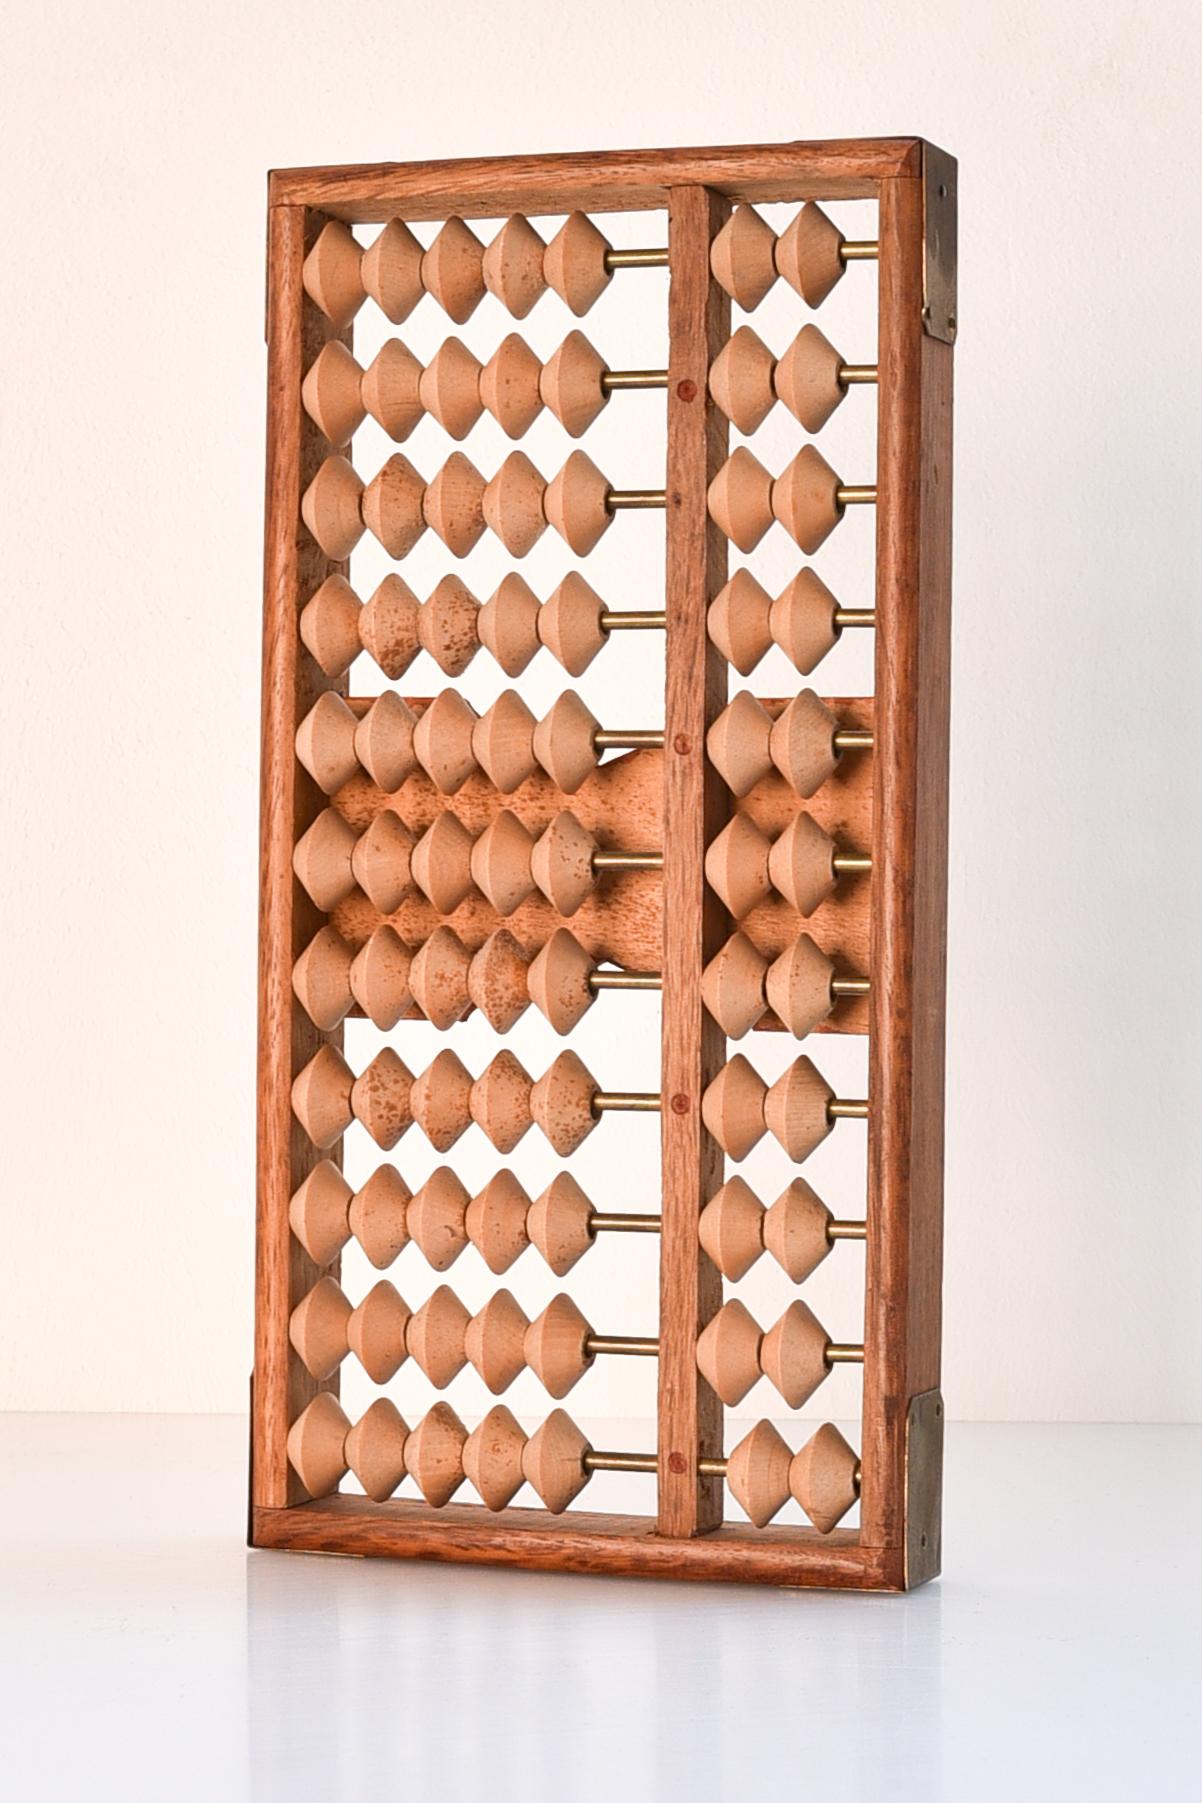 20th century Japanese soroban or abacus (counting frame) in hardwood. 